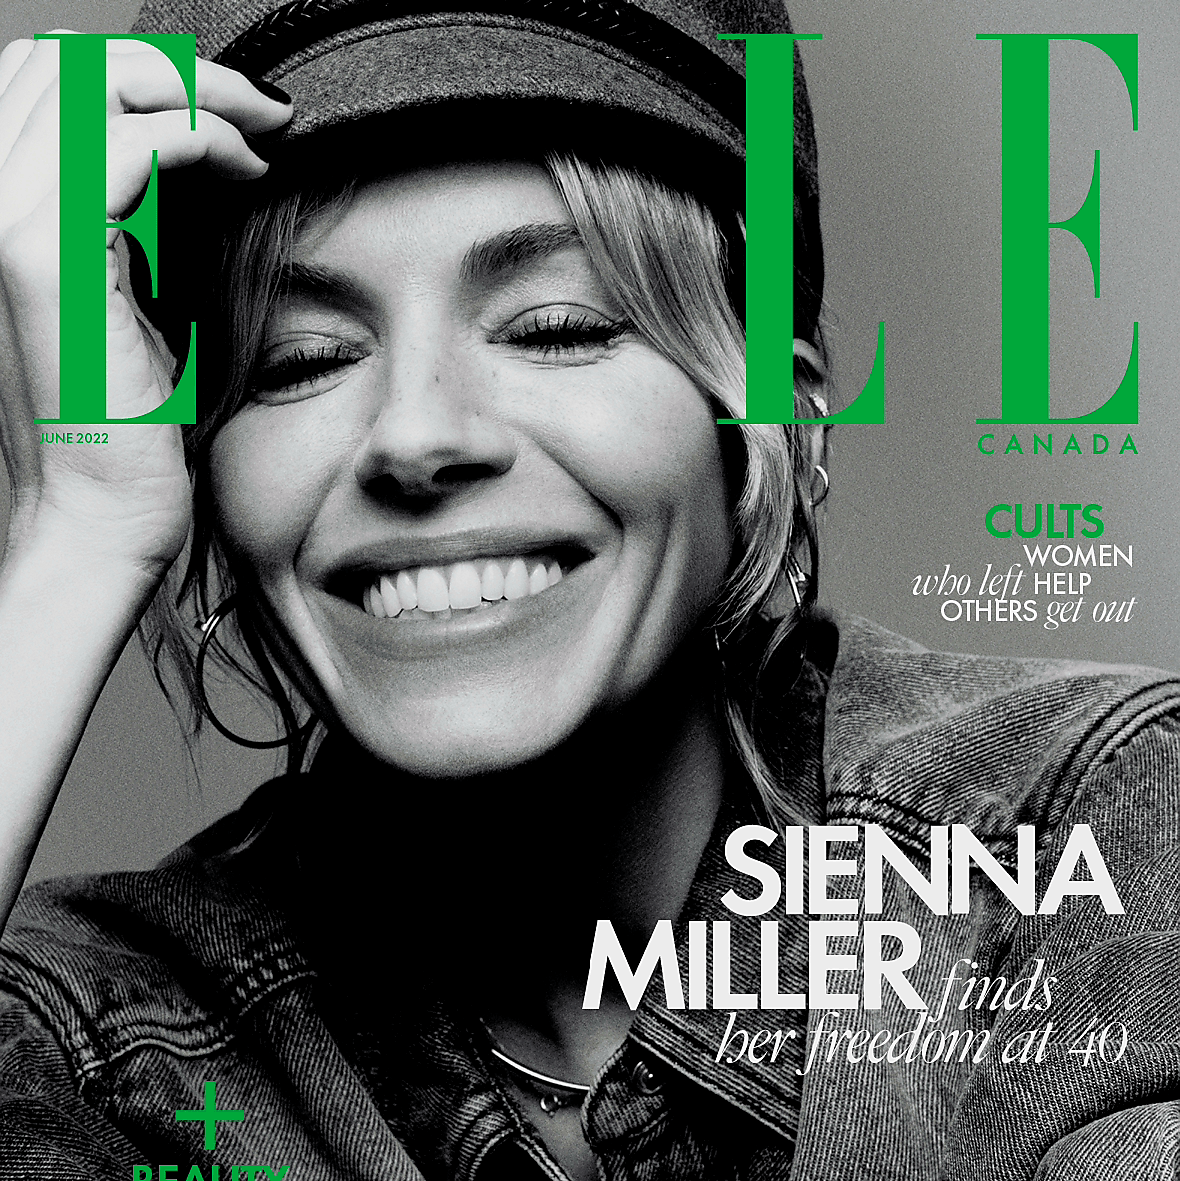 Actress Sienna Miller on Elle Canada cover via 360 MAGAZINE